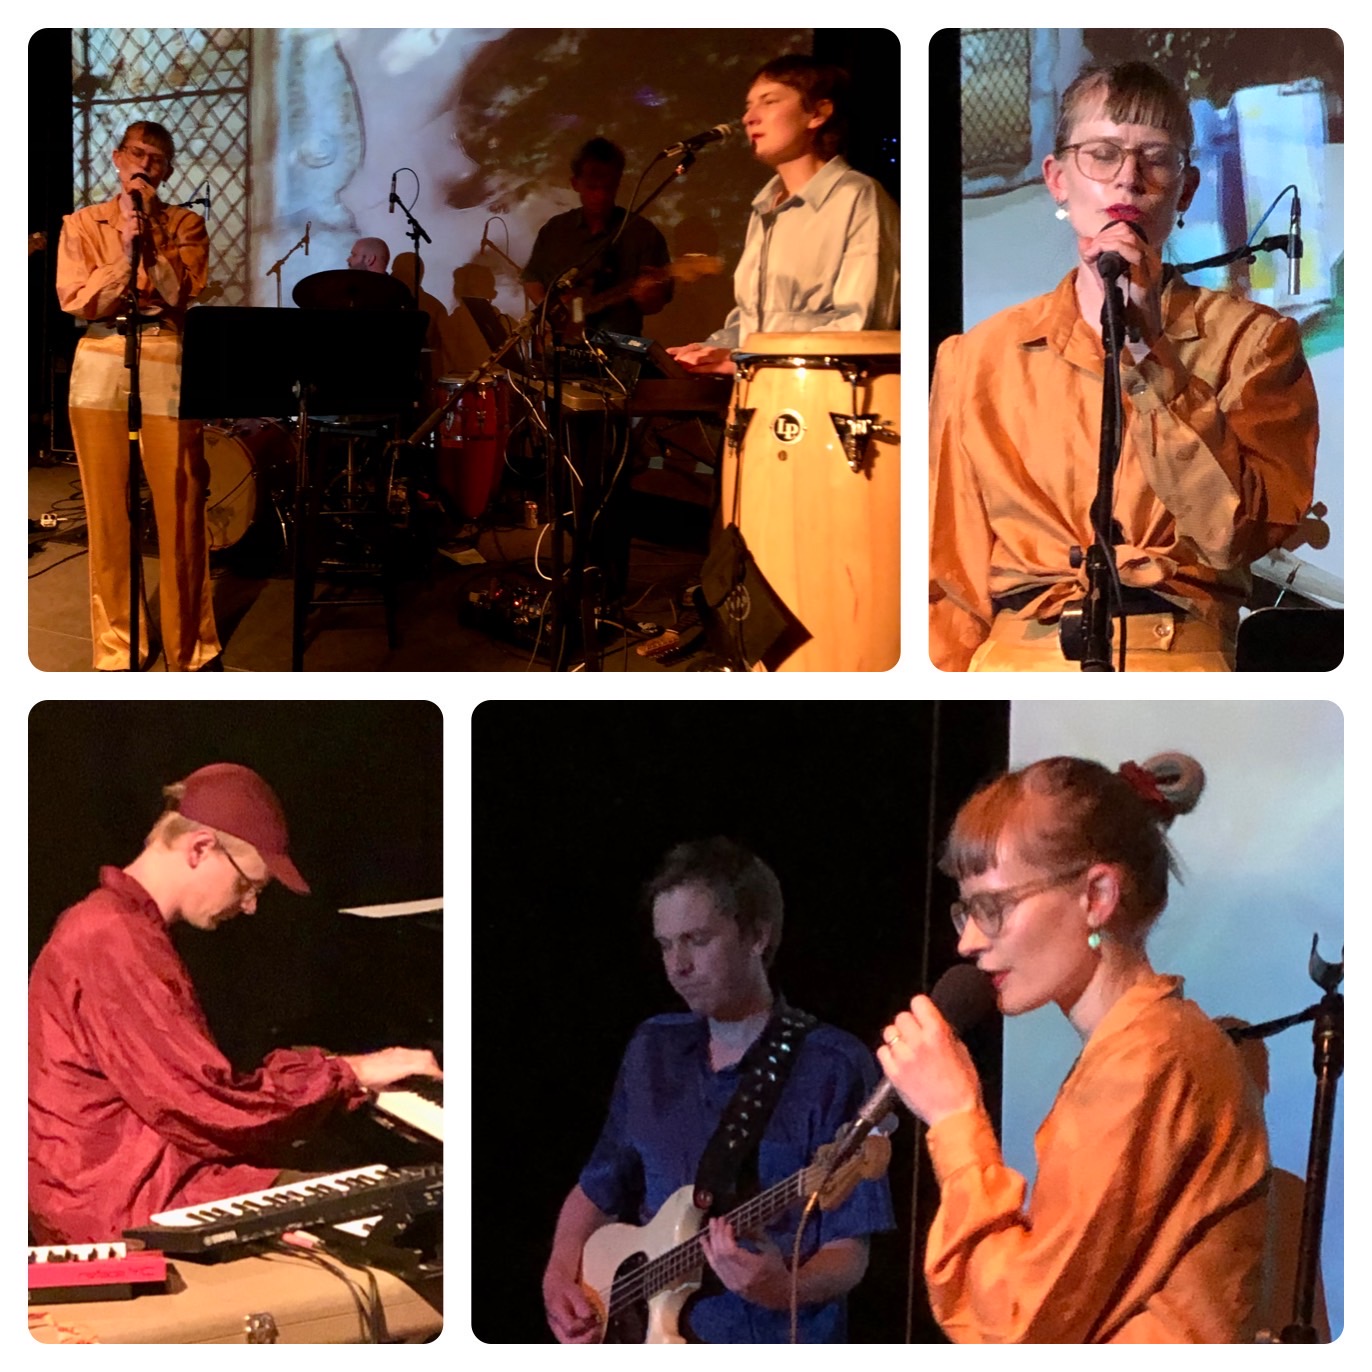 Jenny Hval and band at Chicago's Constellation May 15th, 2022 - photo by Dave Robbins